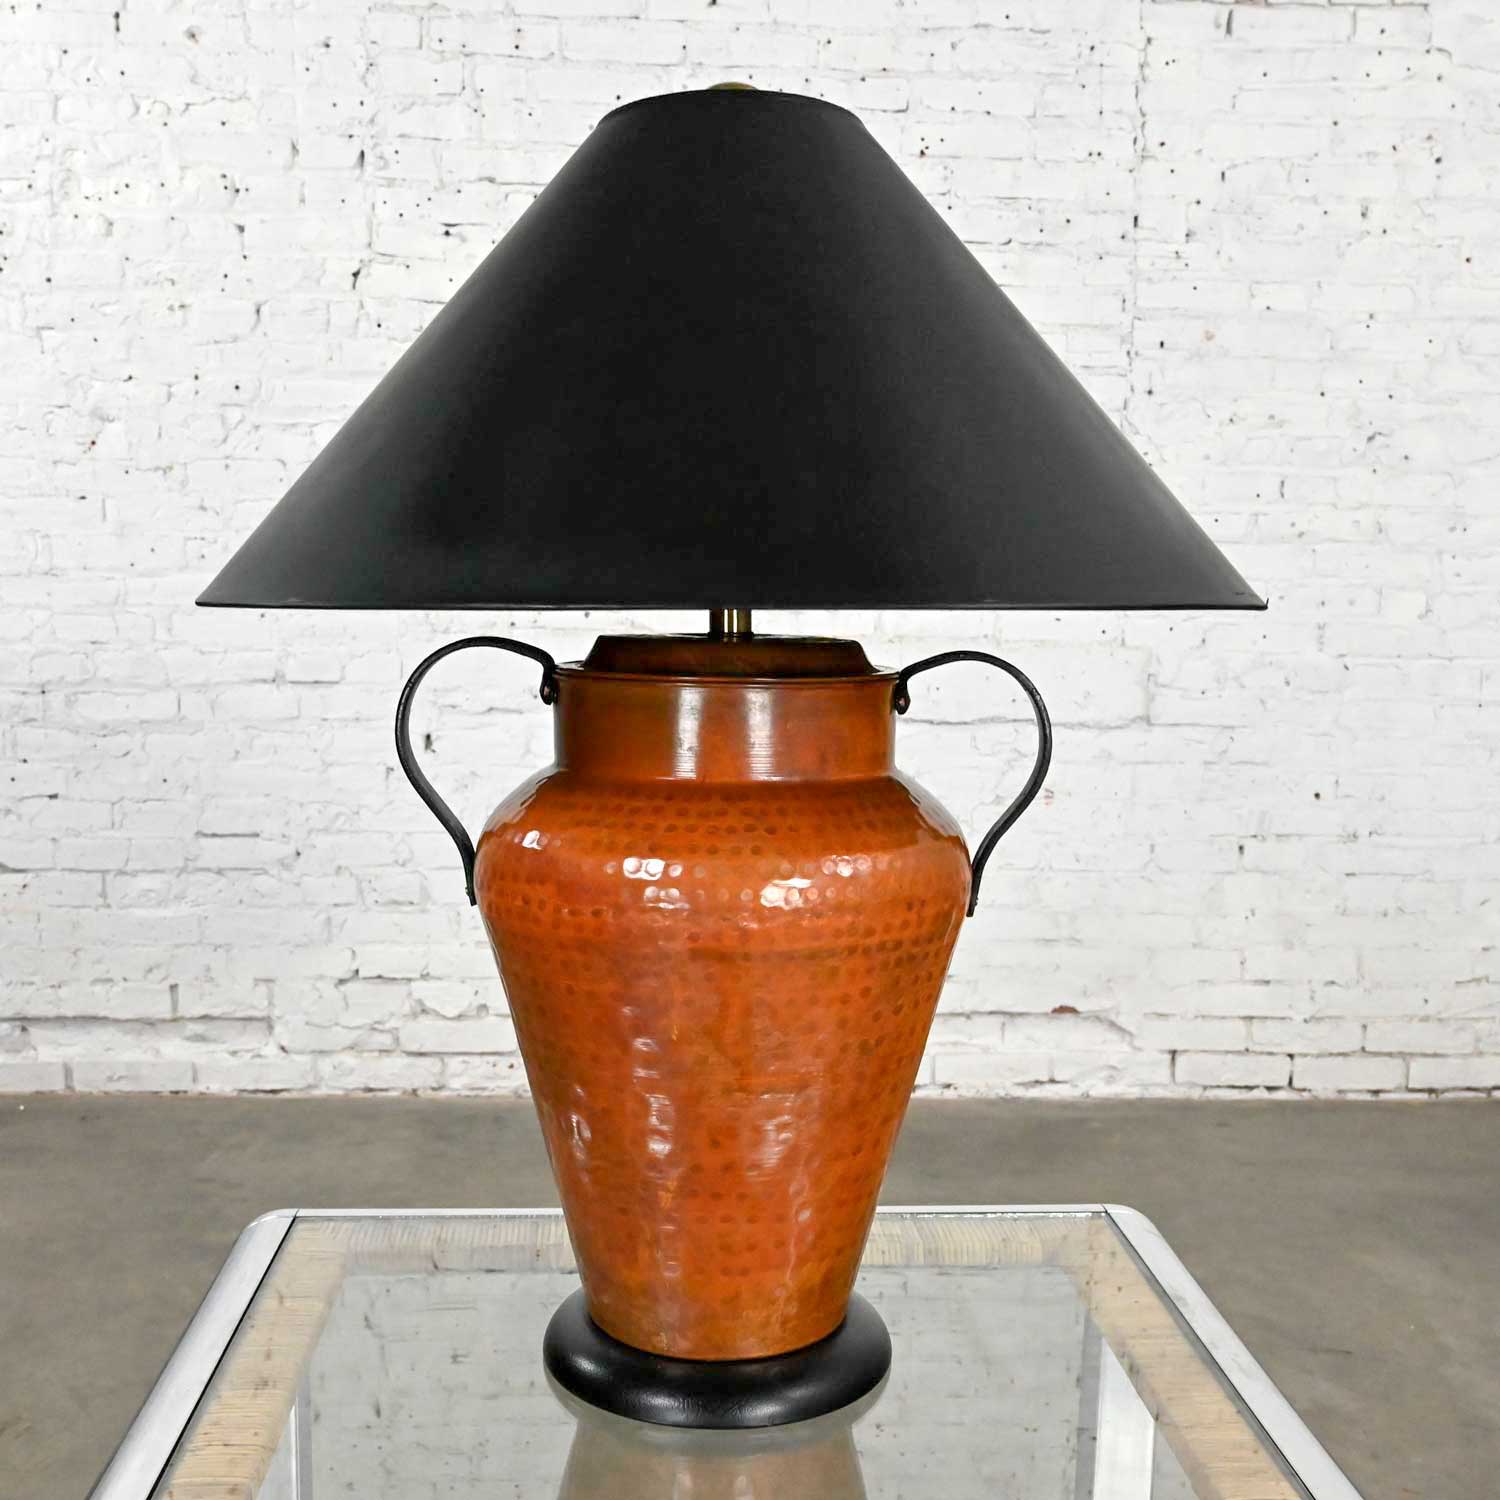 Moorish Style Frederick Cooper Hammered Copper Urn Shape Double Handled Lamp Black Coolie Shade